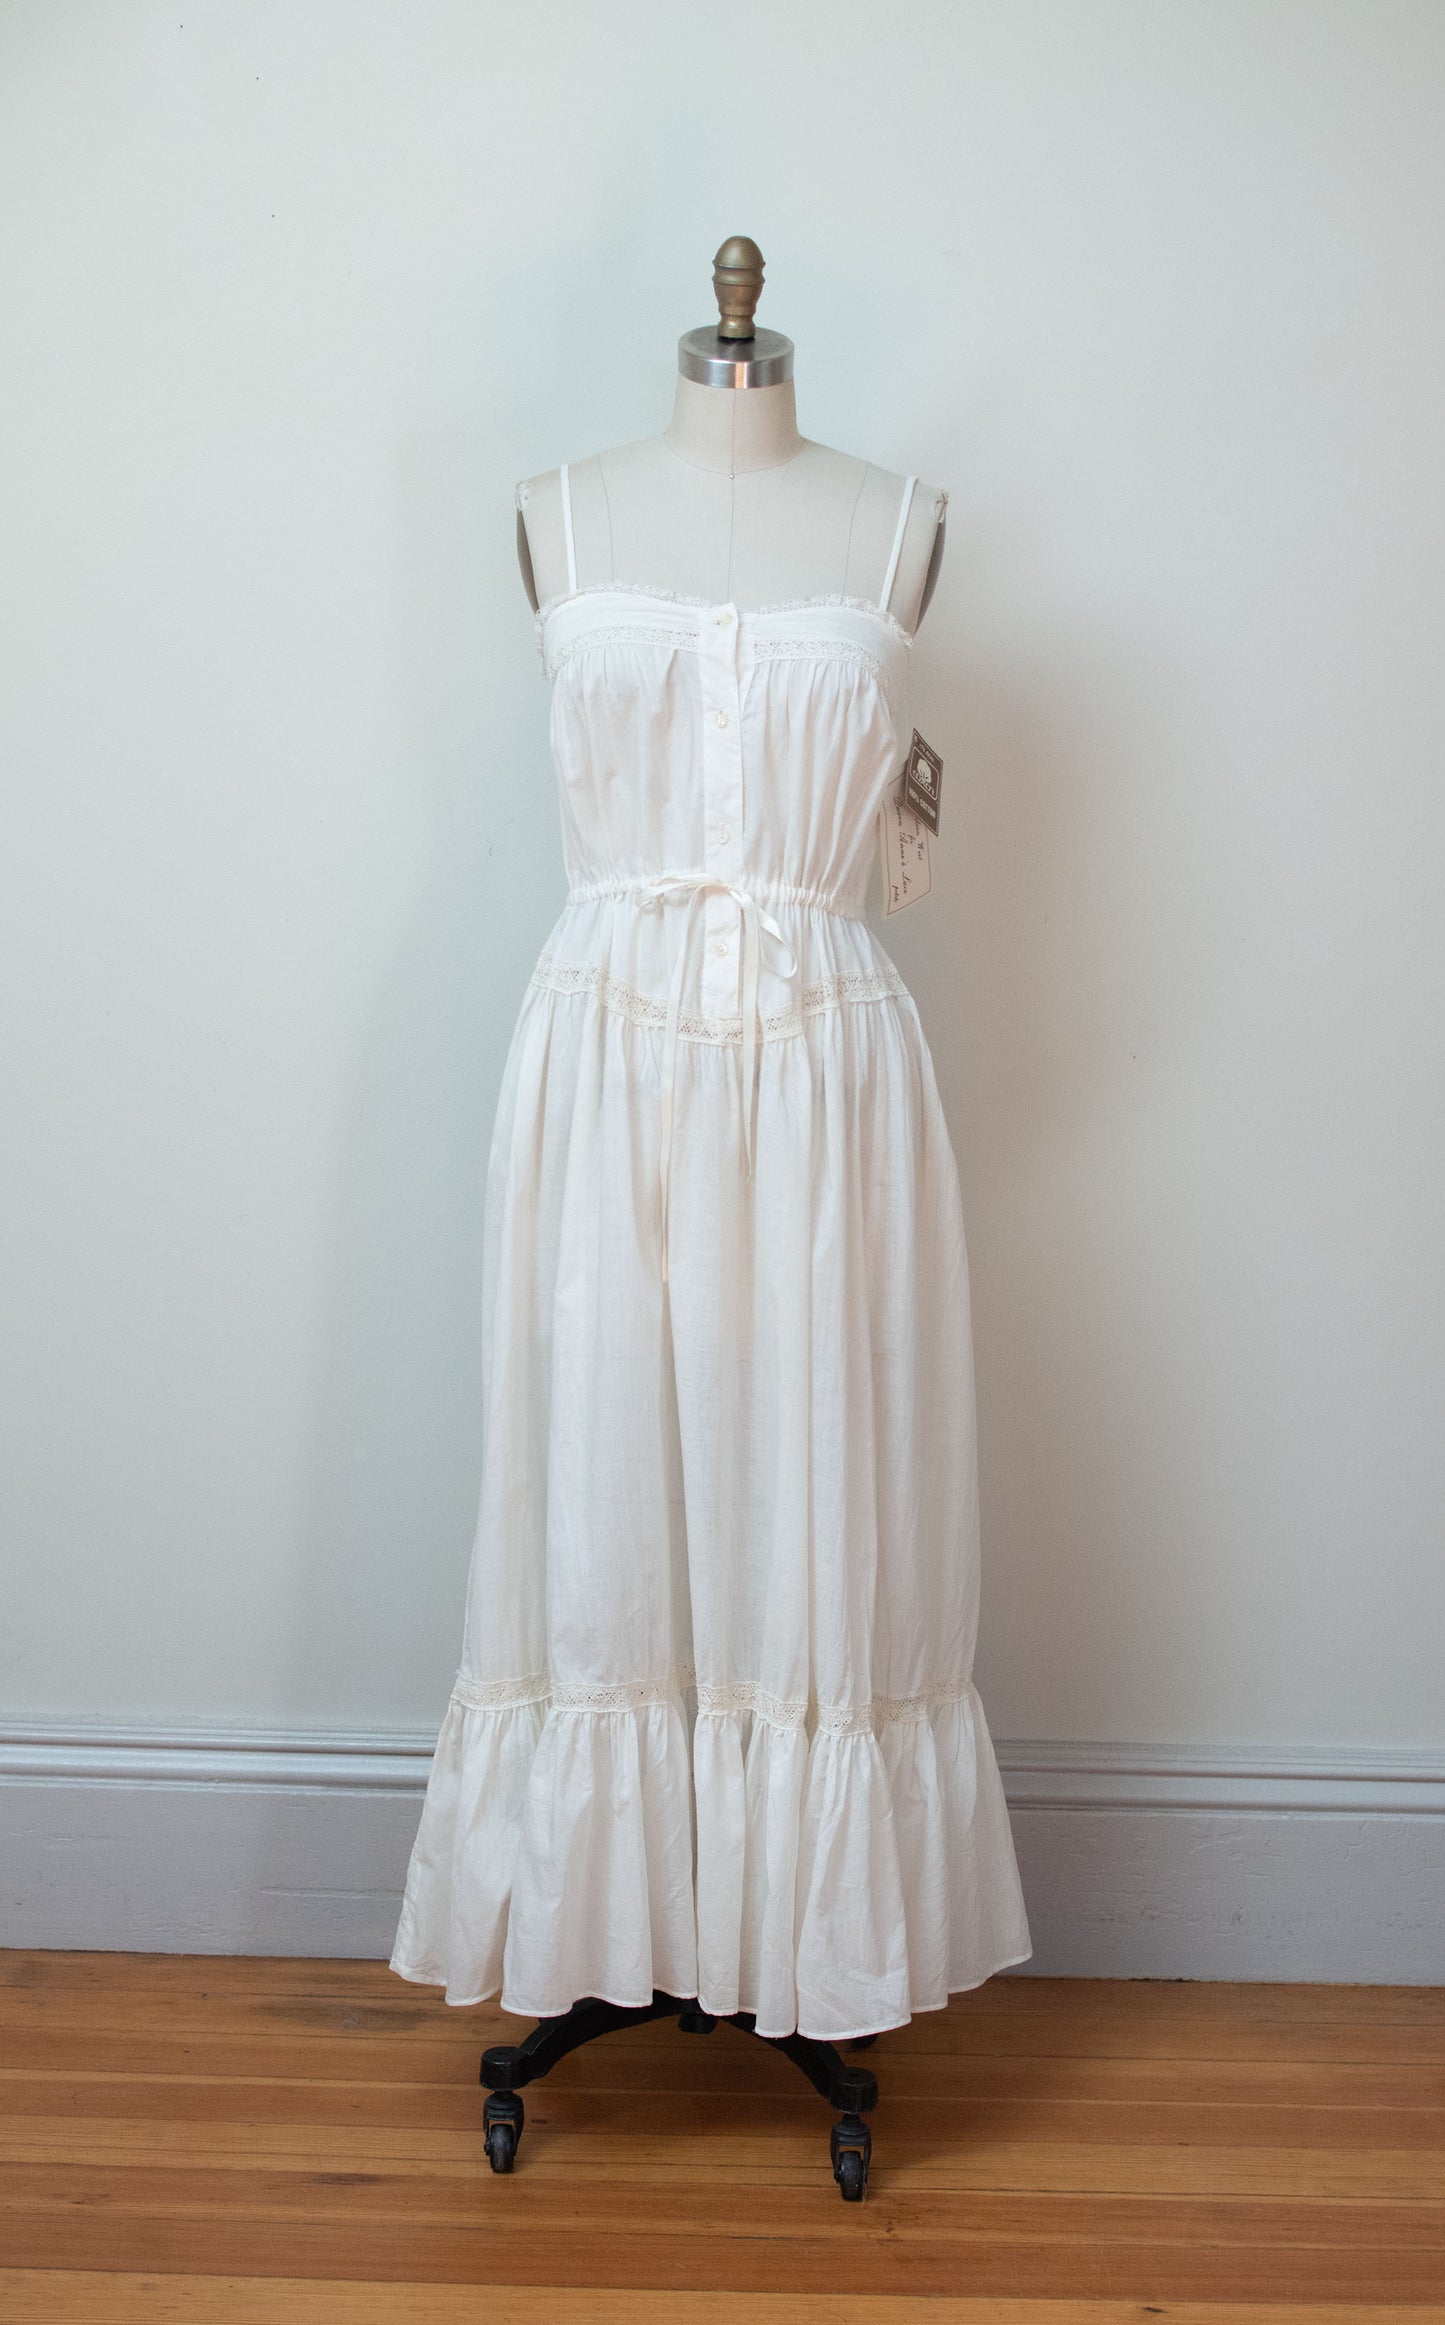 1980s Queen Anne's Lace Dress